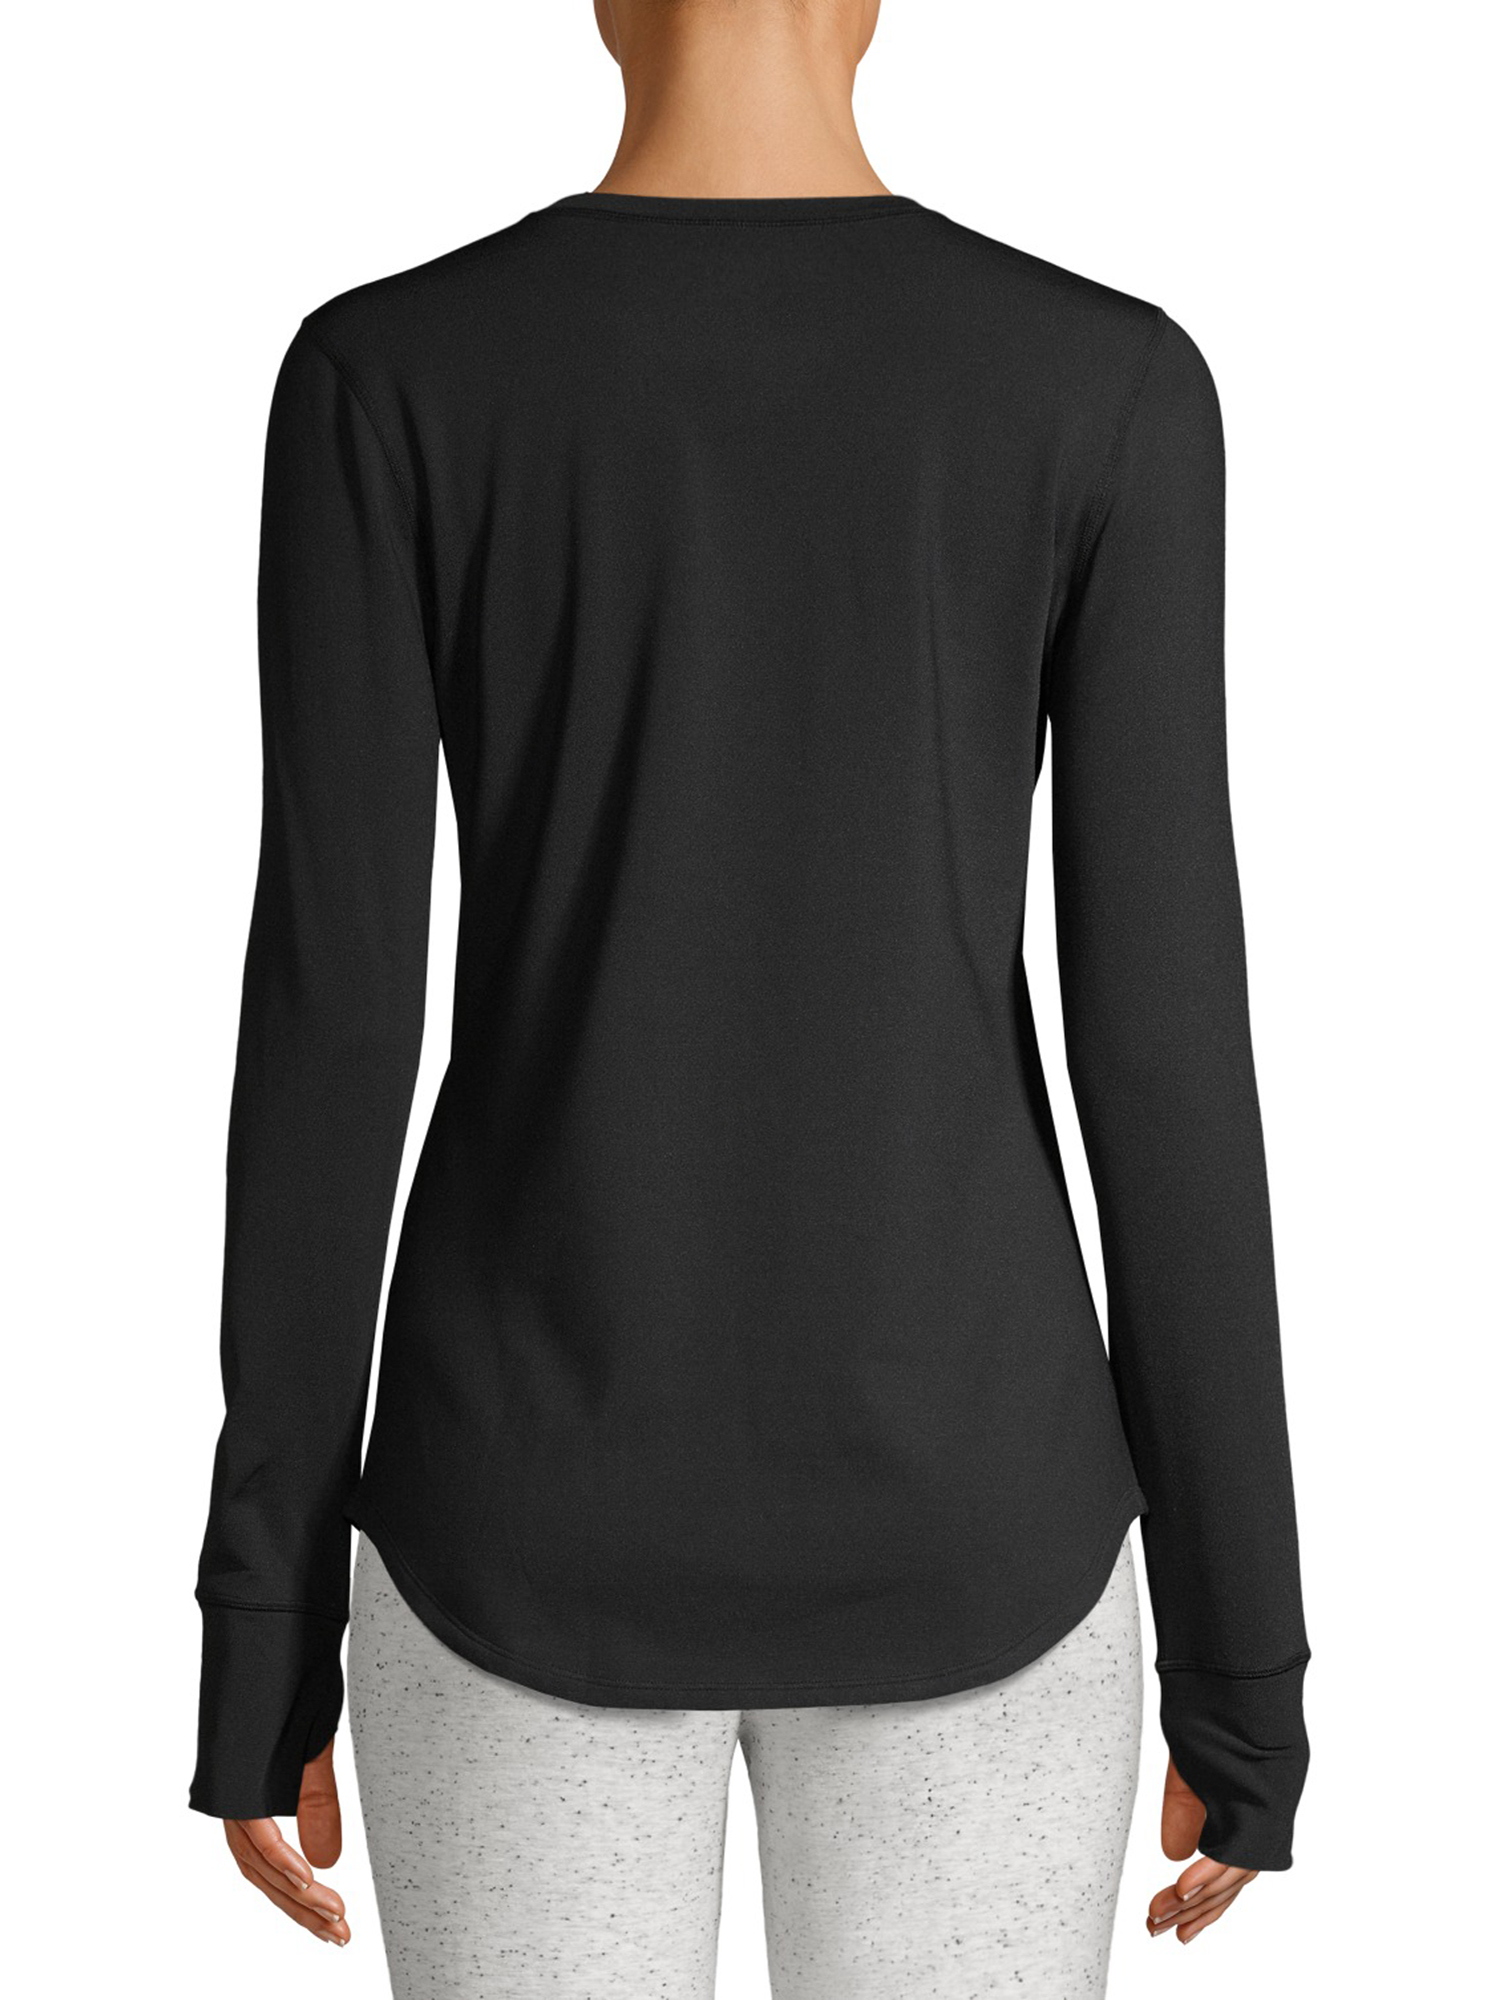 ClimateRight by Cuddl Duds Stretch Fleece Women's Long Sleeve Mock with  Half Zip Base Layer Top, Sizes XS to 4XL 